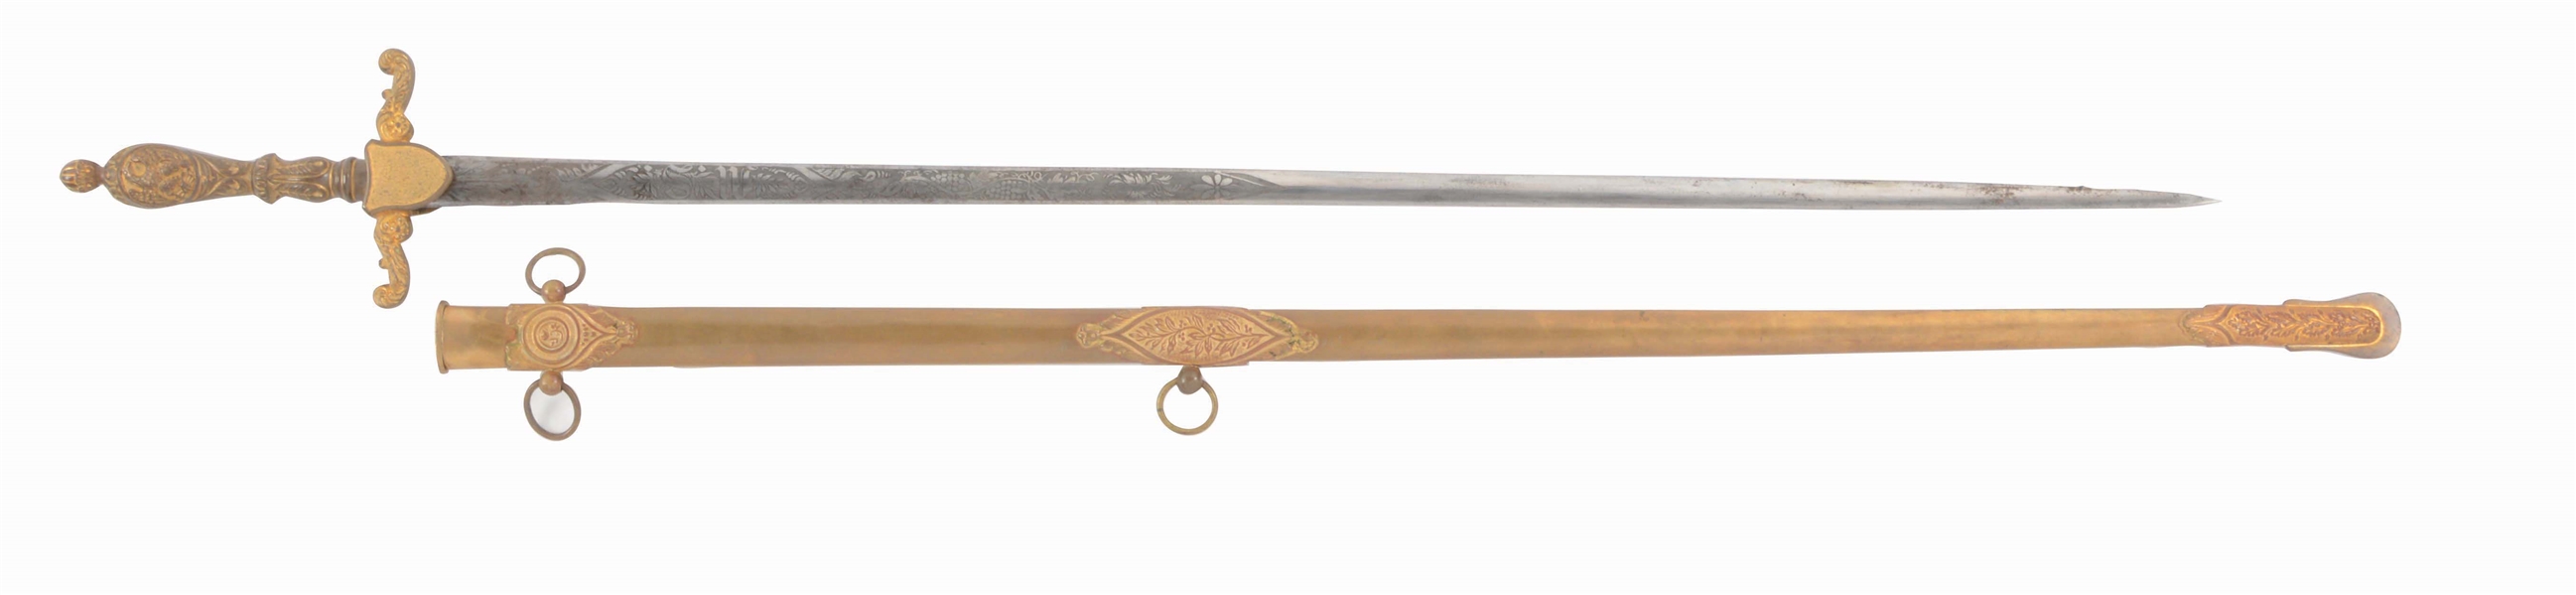 SCARCE US MEDICAL STAFF SWORD WITH SCABBARD.